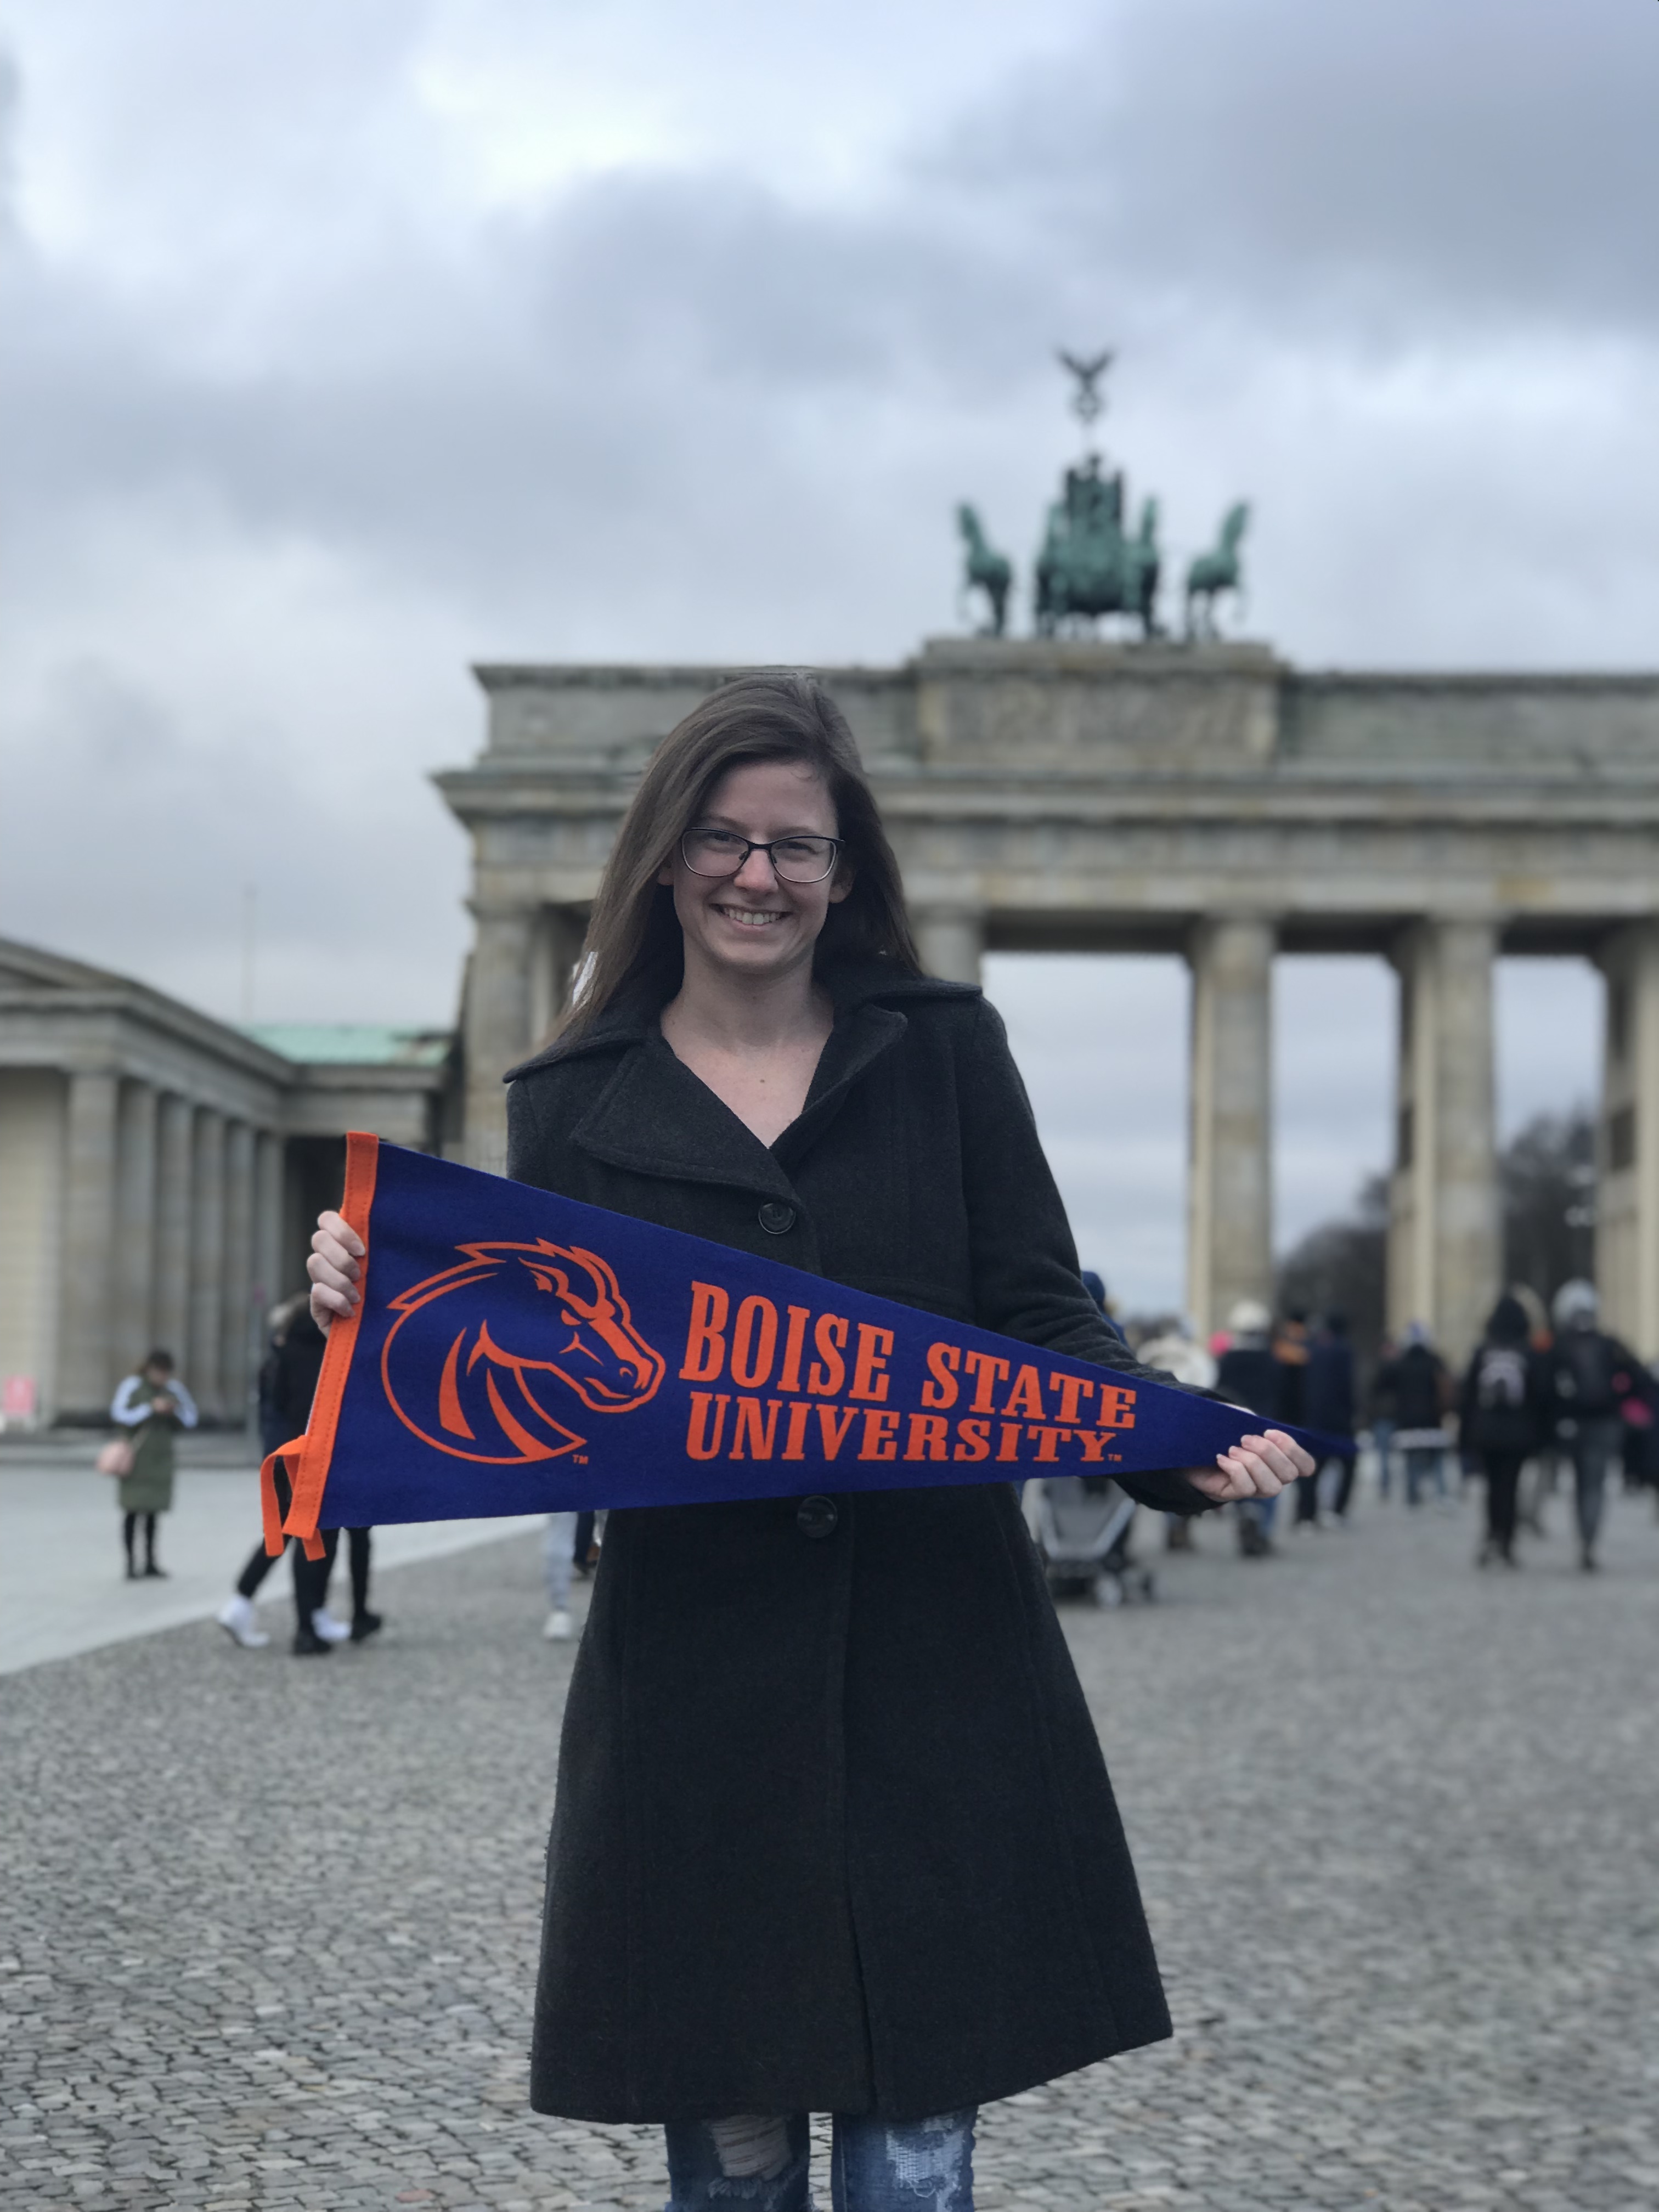 Student holding boise state banner in Berlin Germany